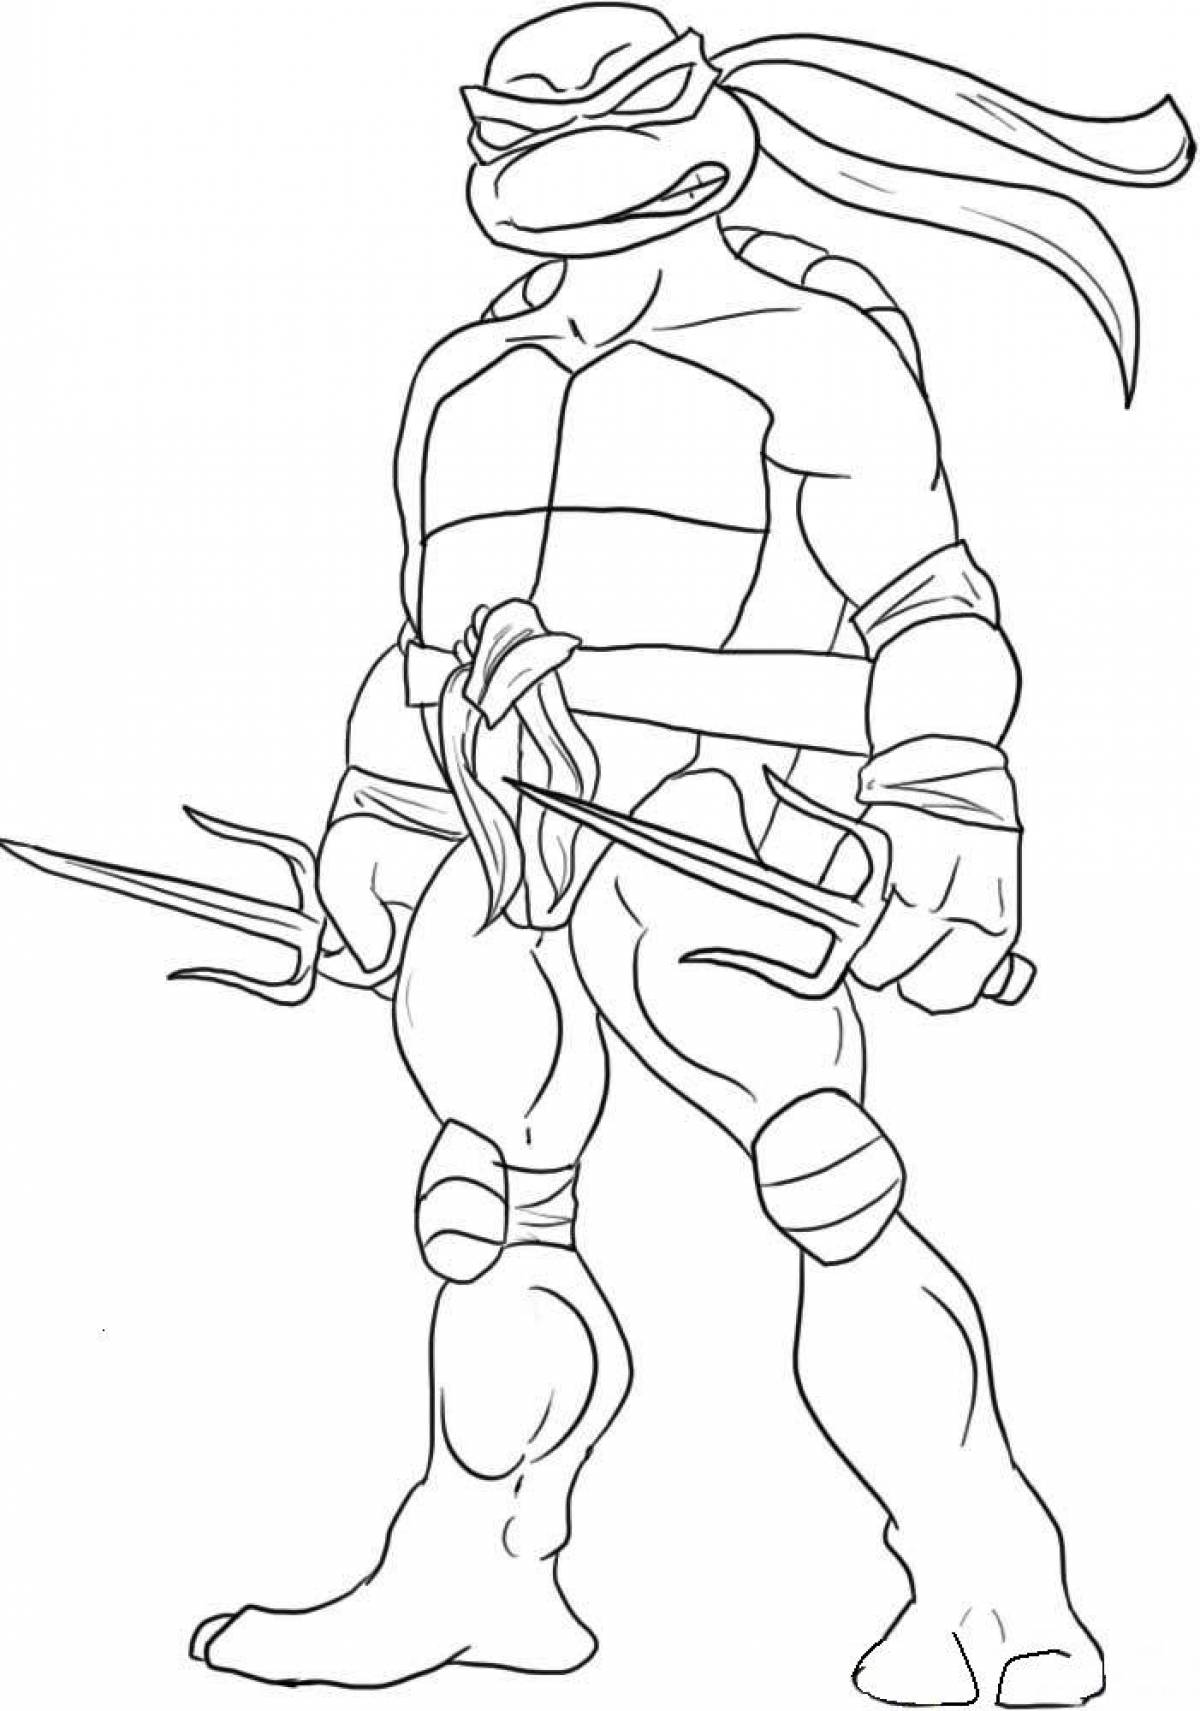 Colorful Teenage Mutant Ninja Turtles coloring pages for kids